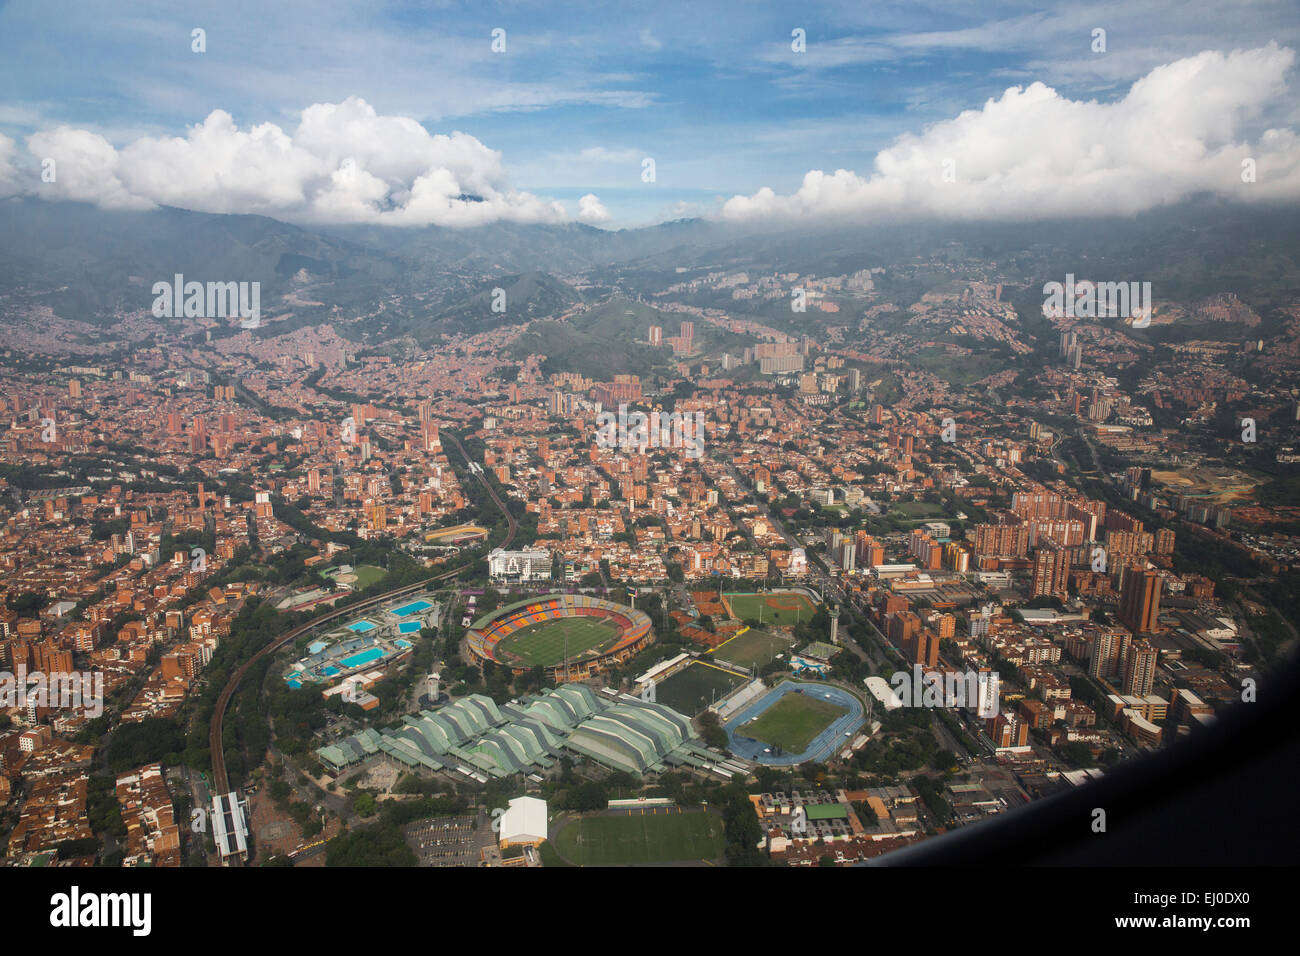 South America, Latin America, Colombia, Medellin, town, city, overview, Stock Photo